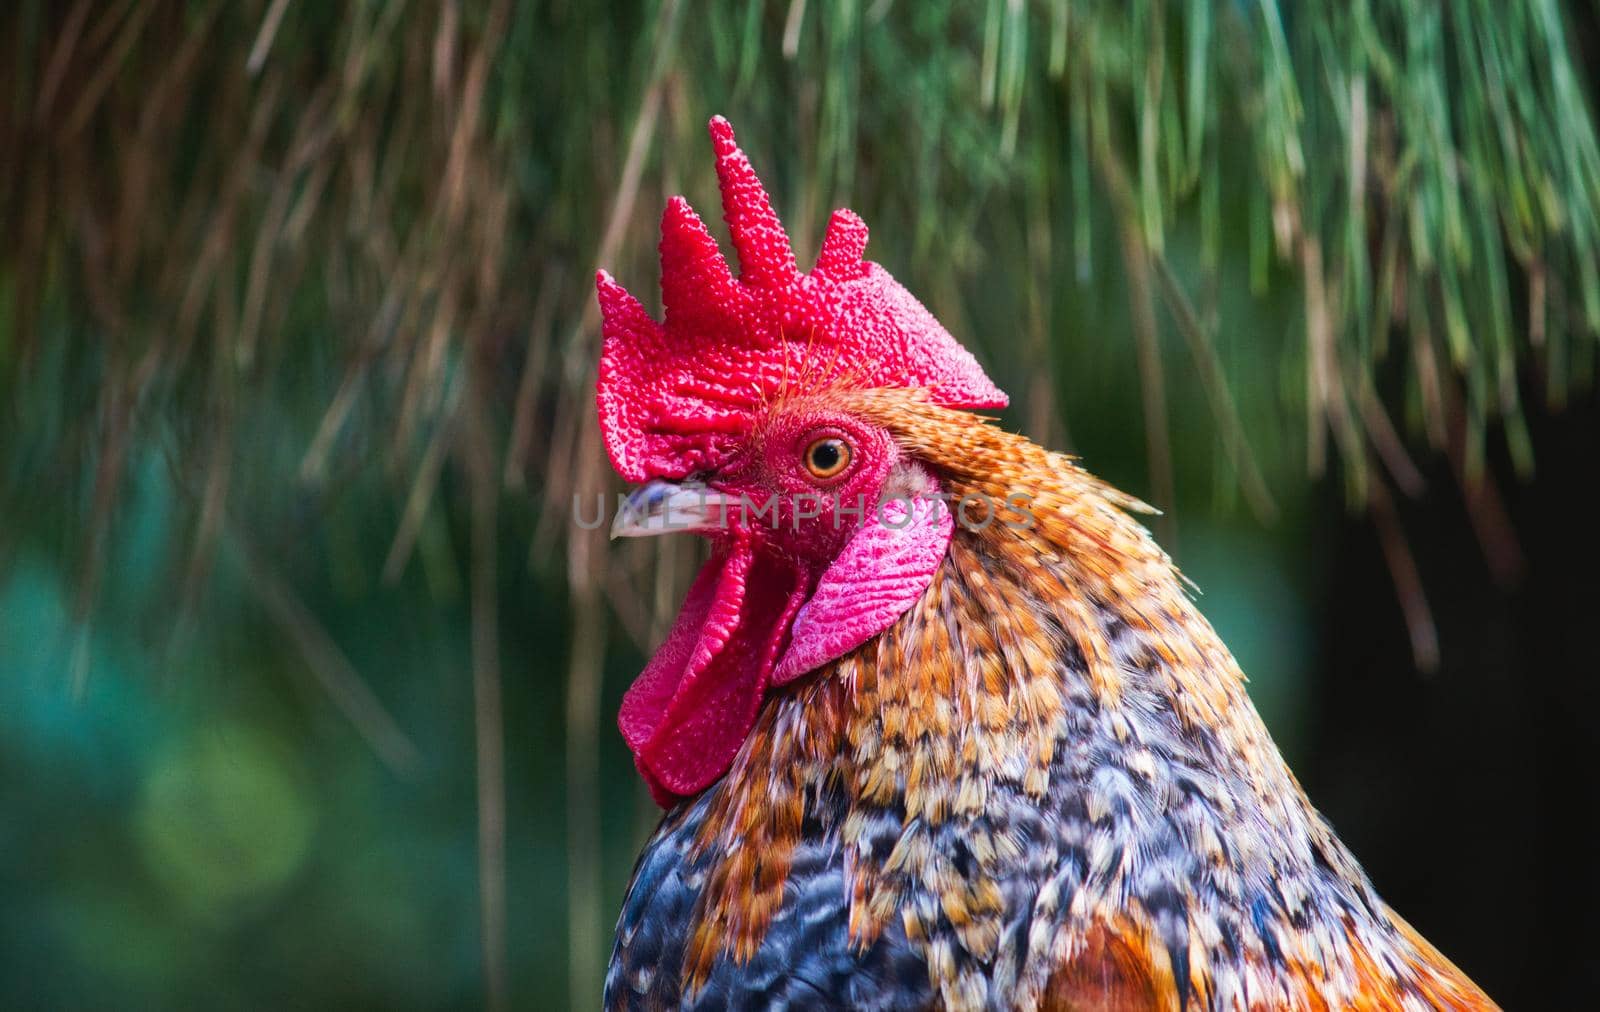 Close-up portrait of a colorful rooster with bright red crest and wattle